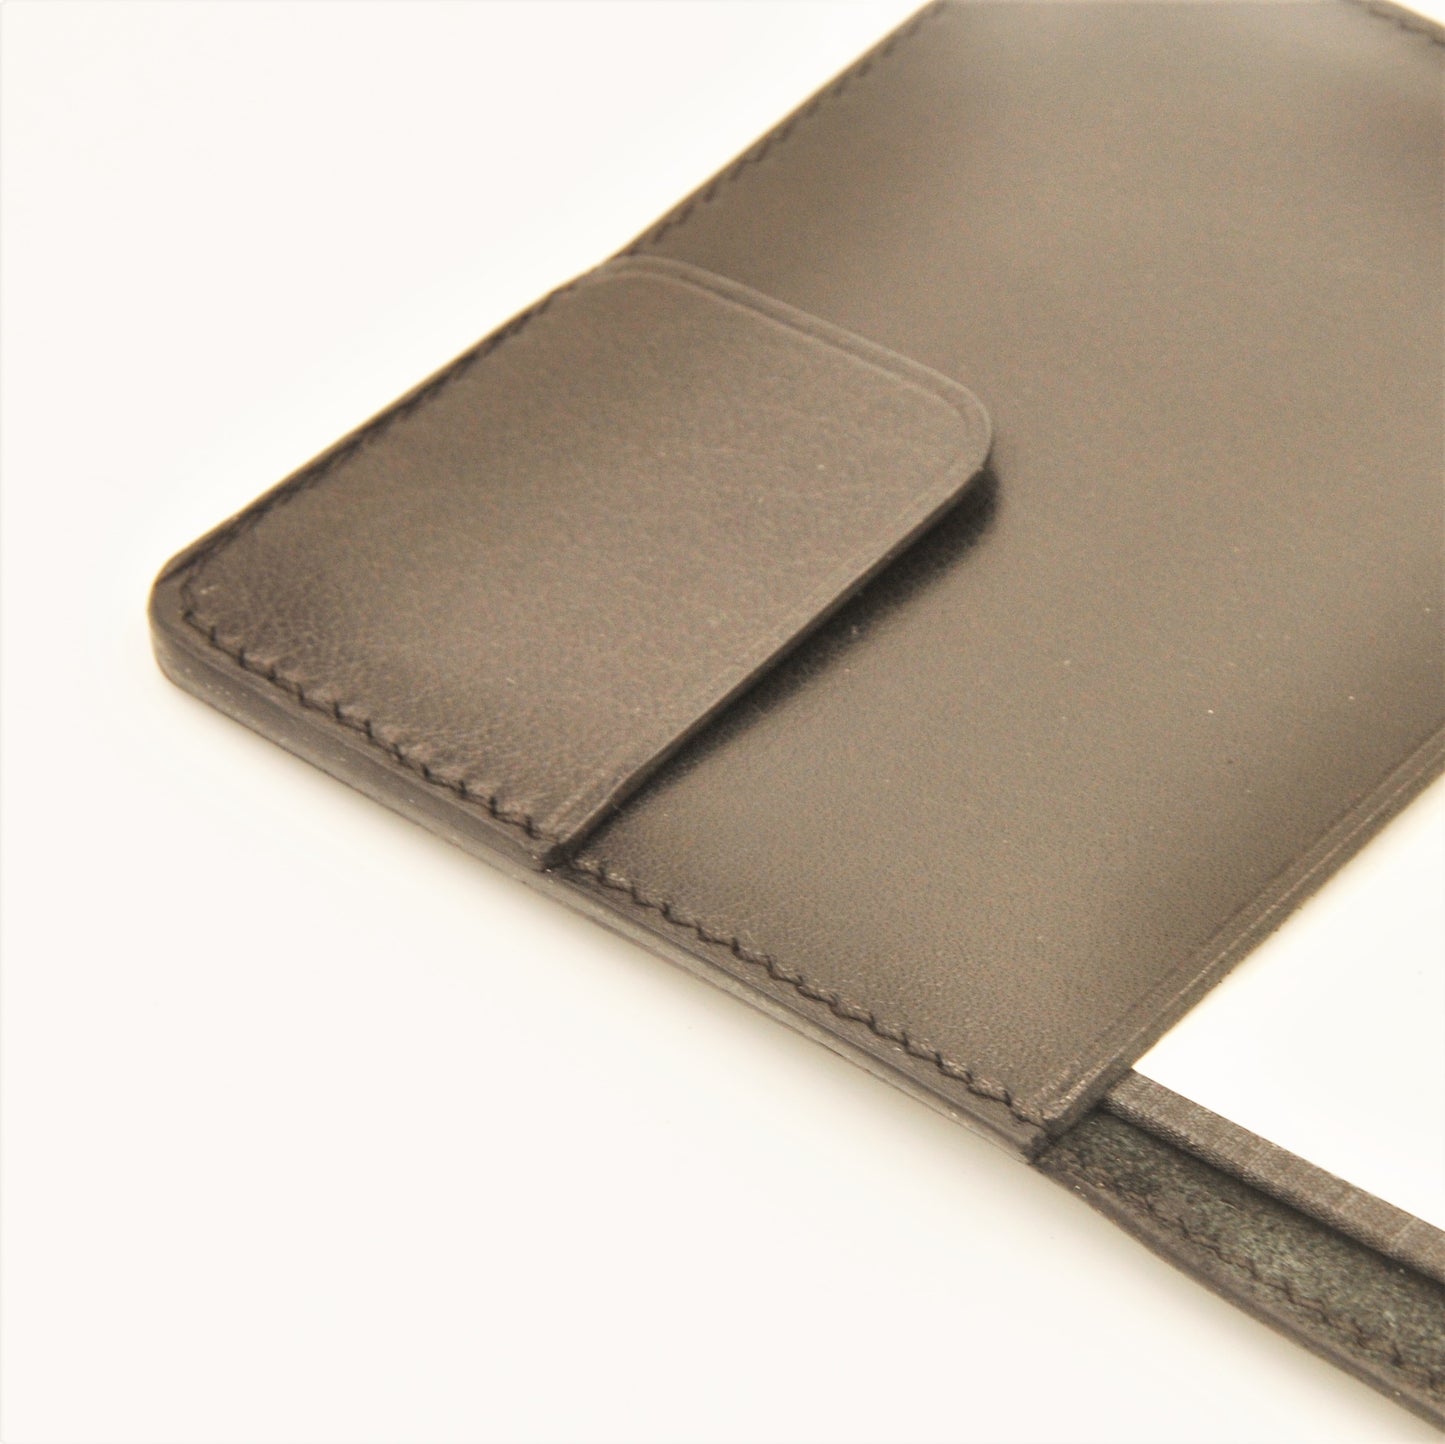 HERITAGE A6-L Journal & Notebook Sleeve